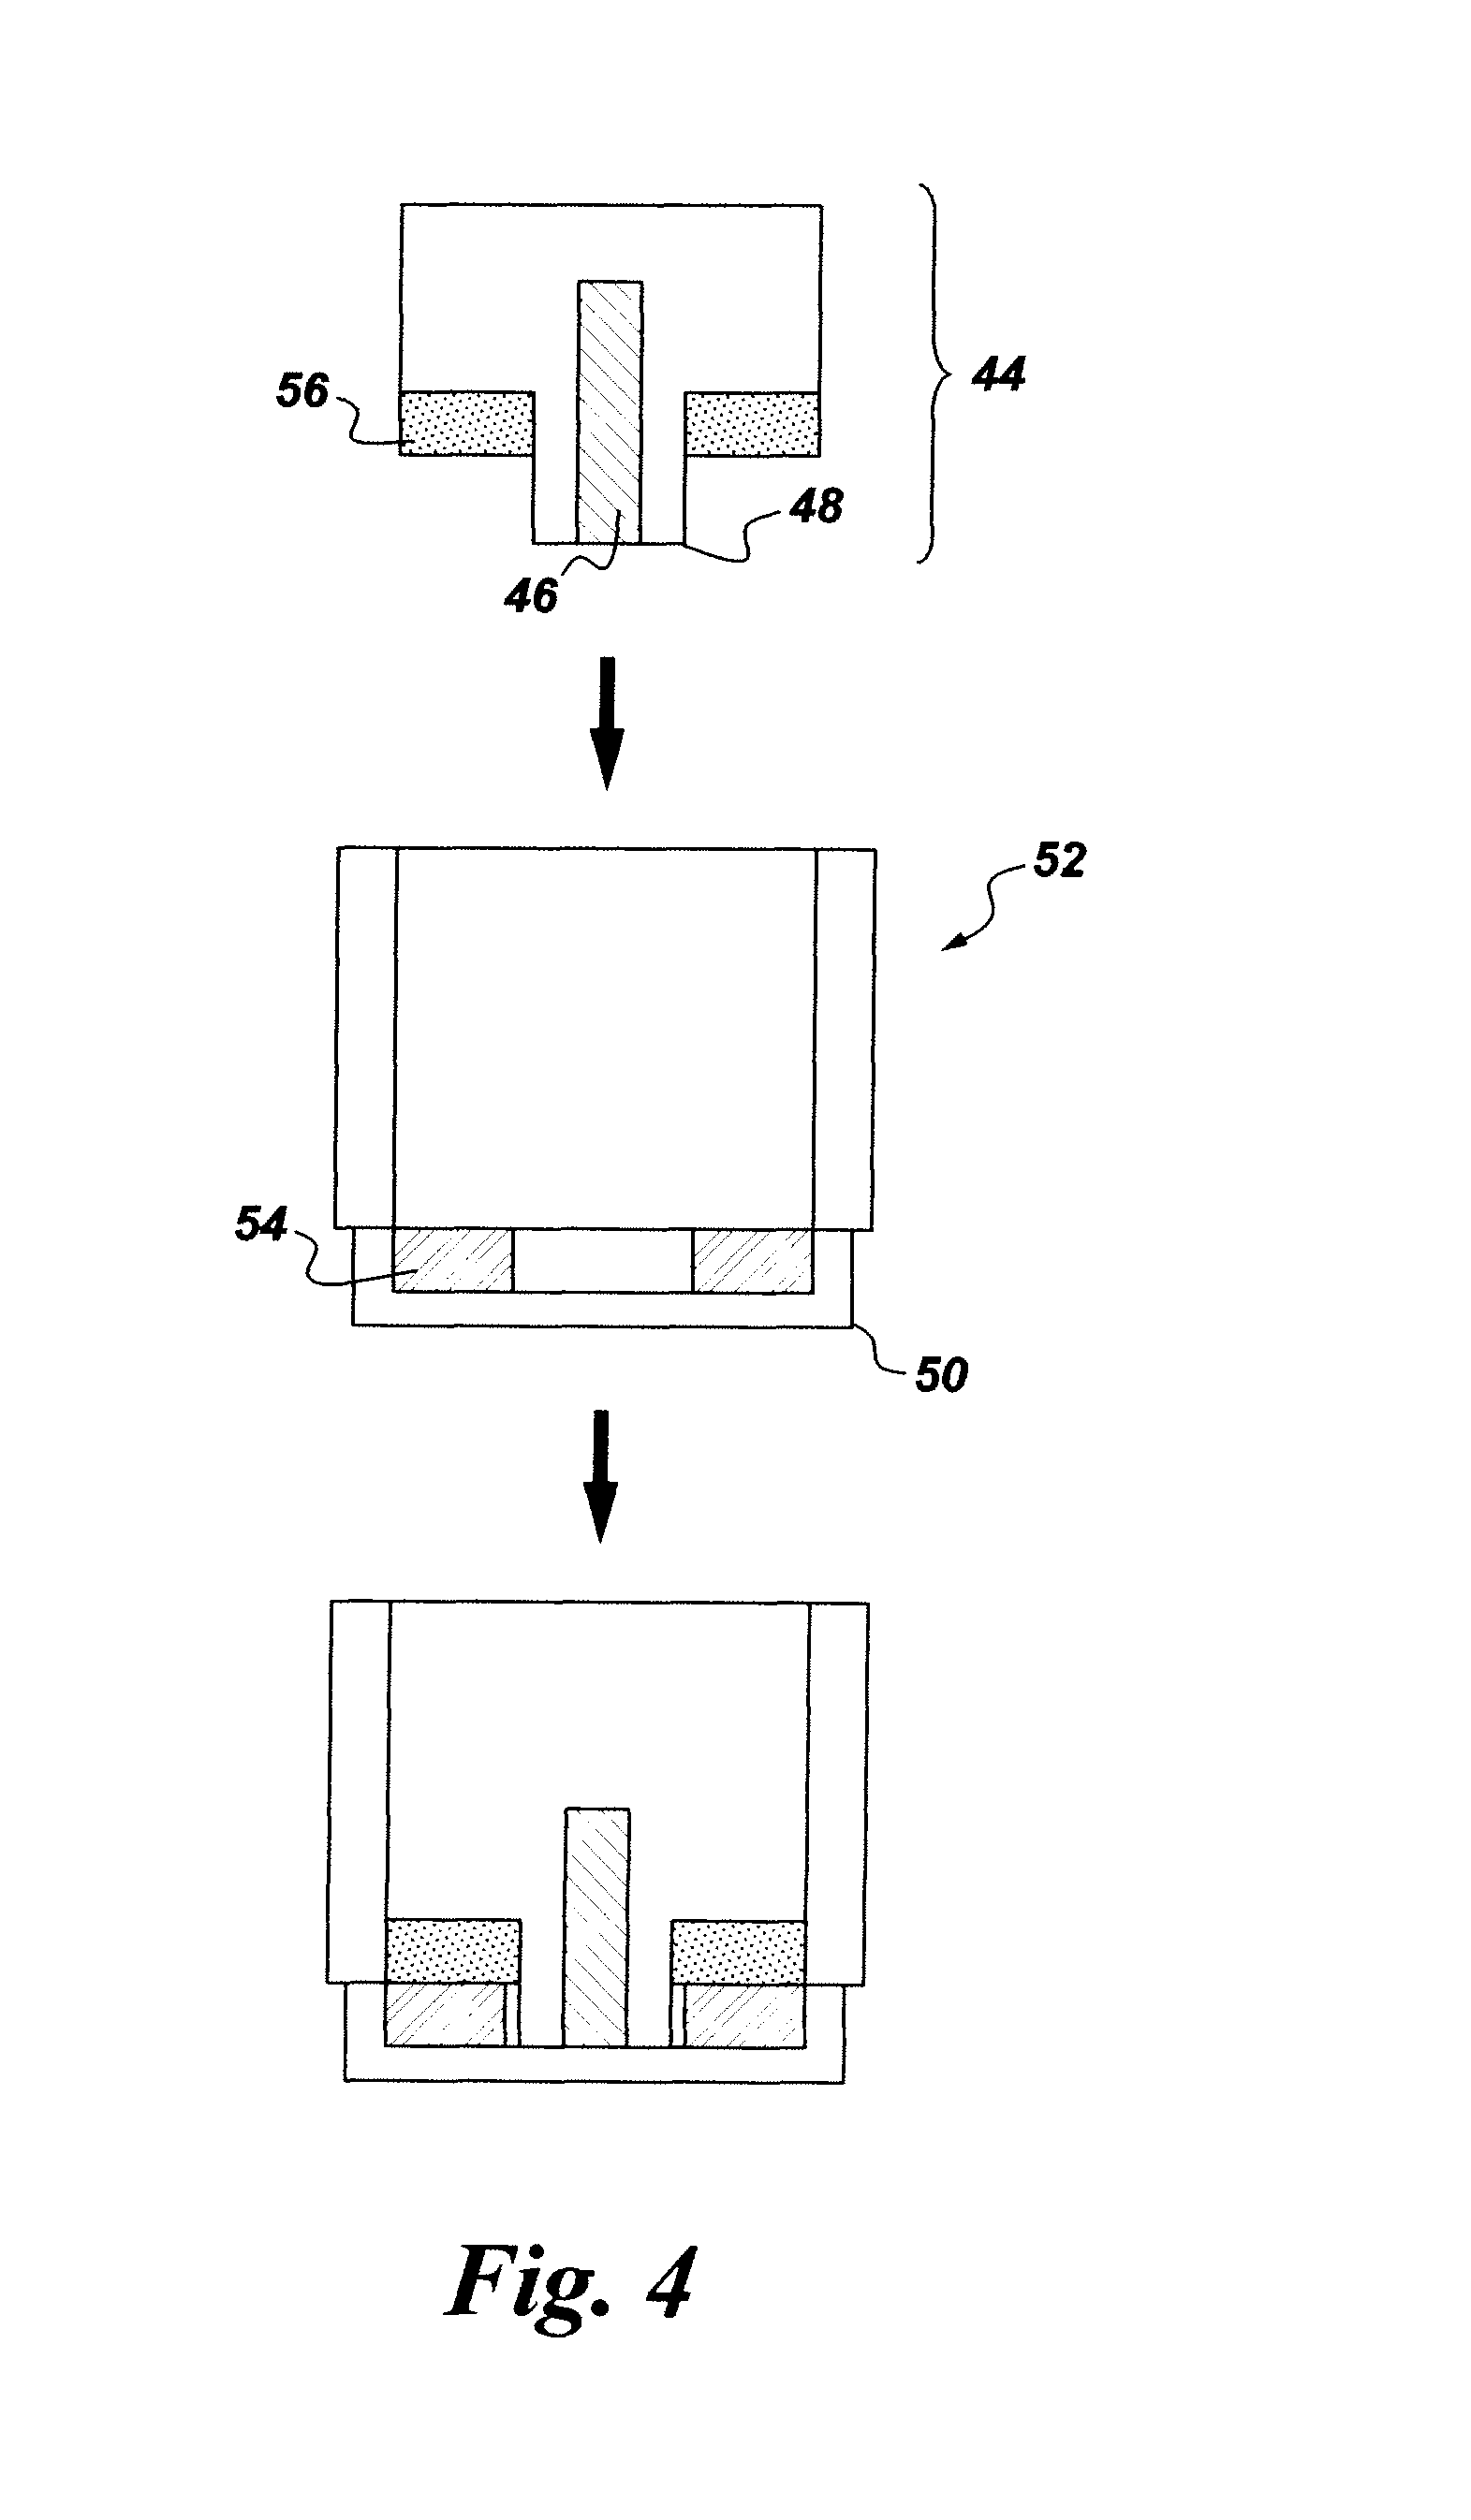 Systems and methods for using ferrite alignment keys in wireless remote sensors